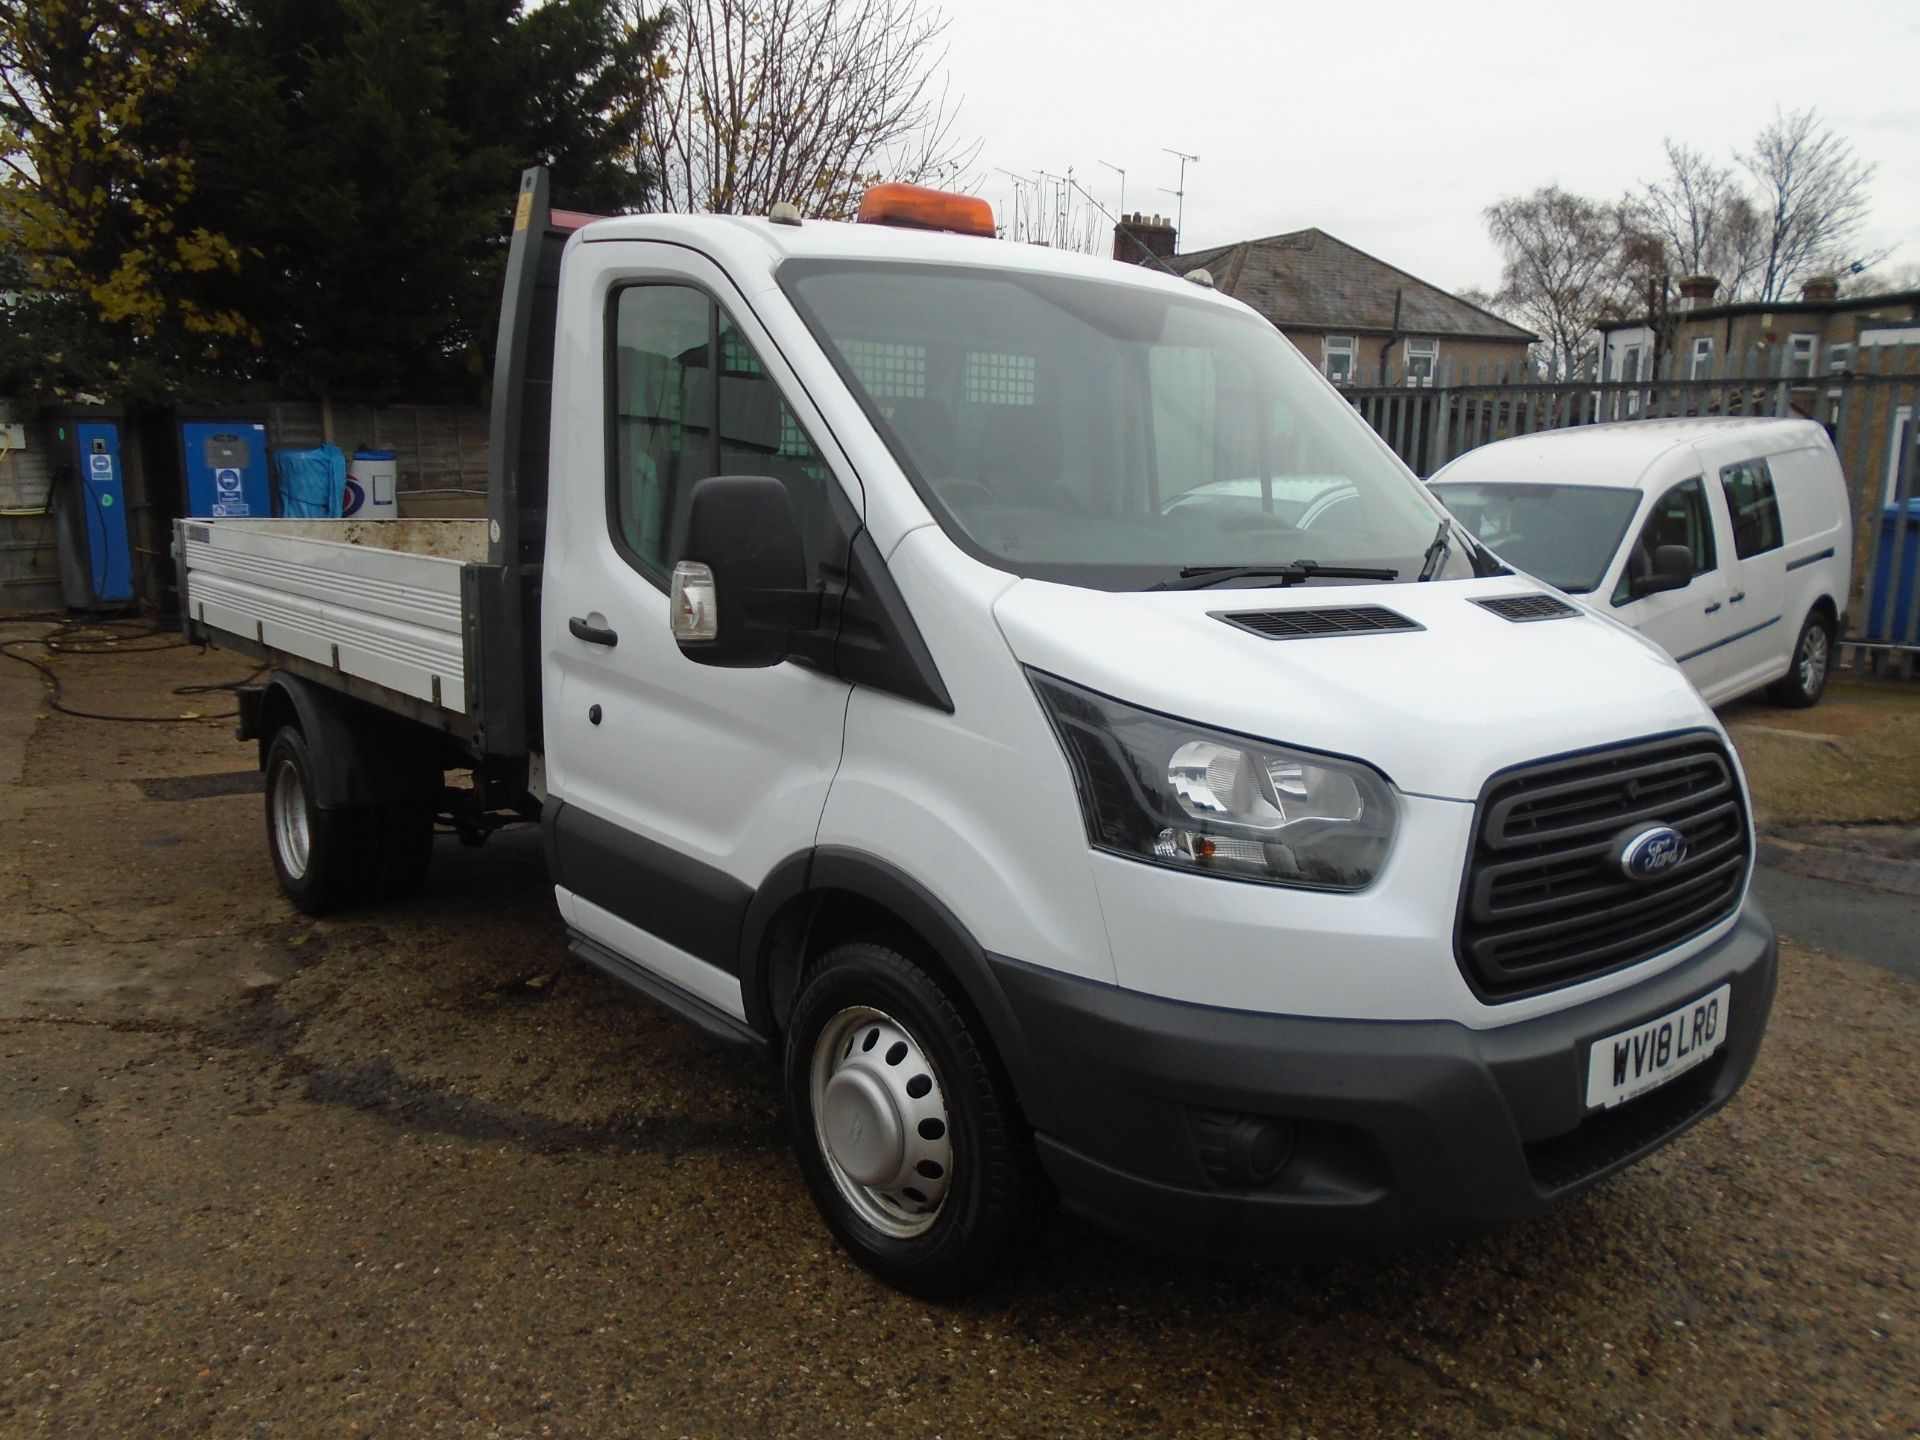 2018 Ford Transit 2.0 Tdci 130Ps One Stop Tipper [1 Way] (WV18LRO)